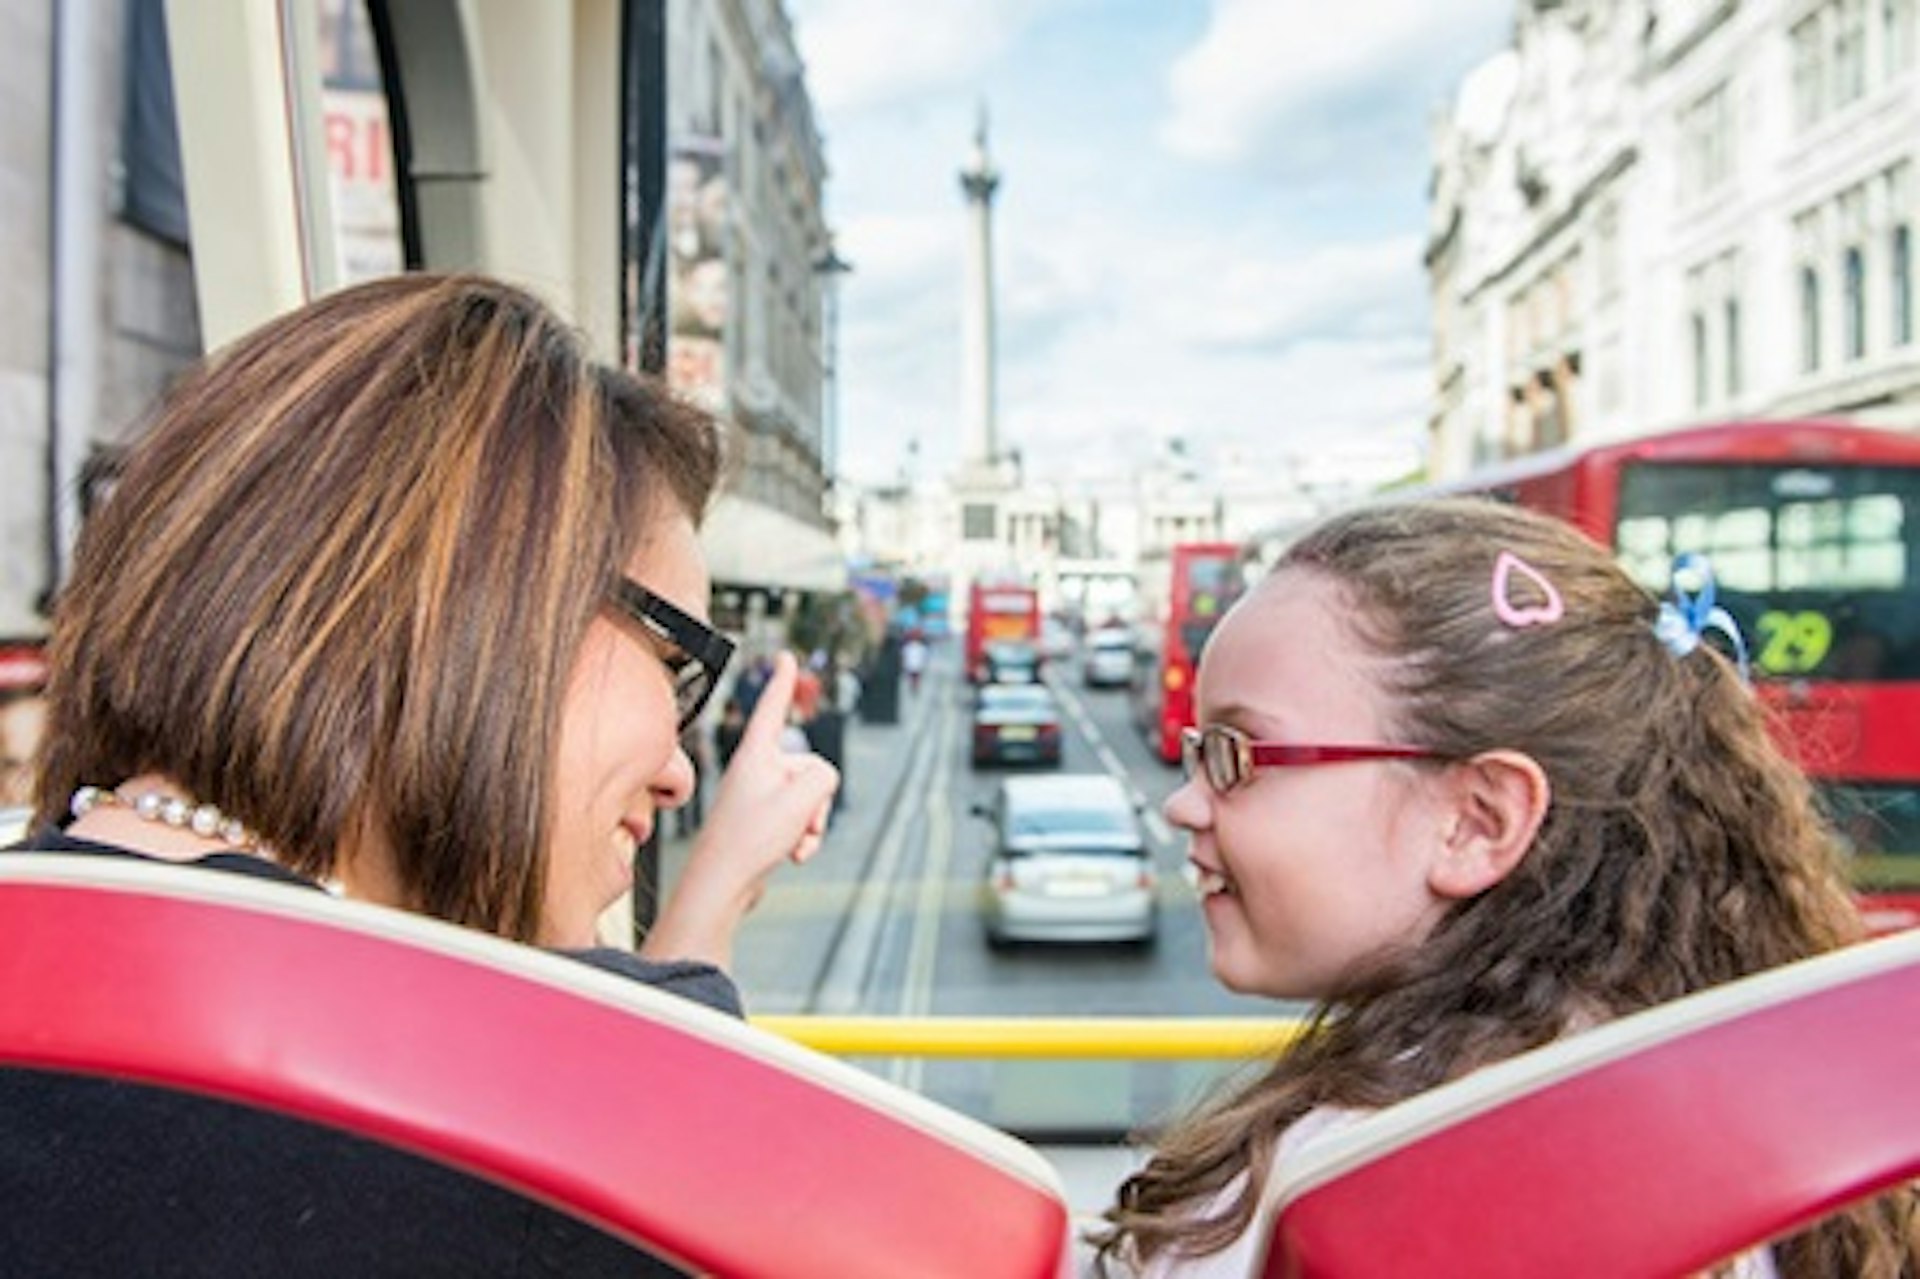 Explore London with Hop-On, Hop-Off Sightseeing Bus Tour and River Cruise for a Family of Four 2